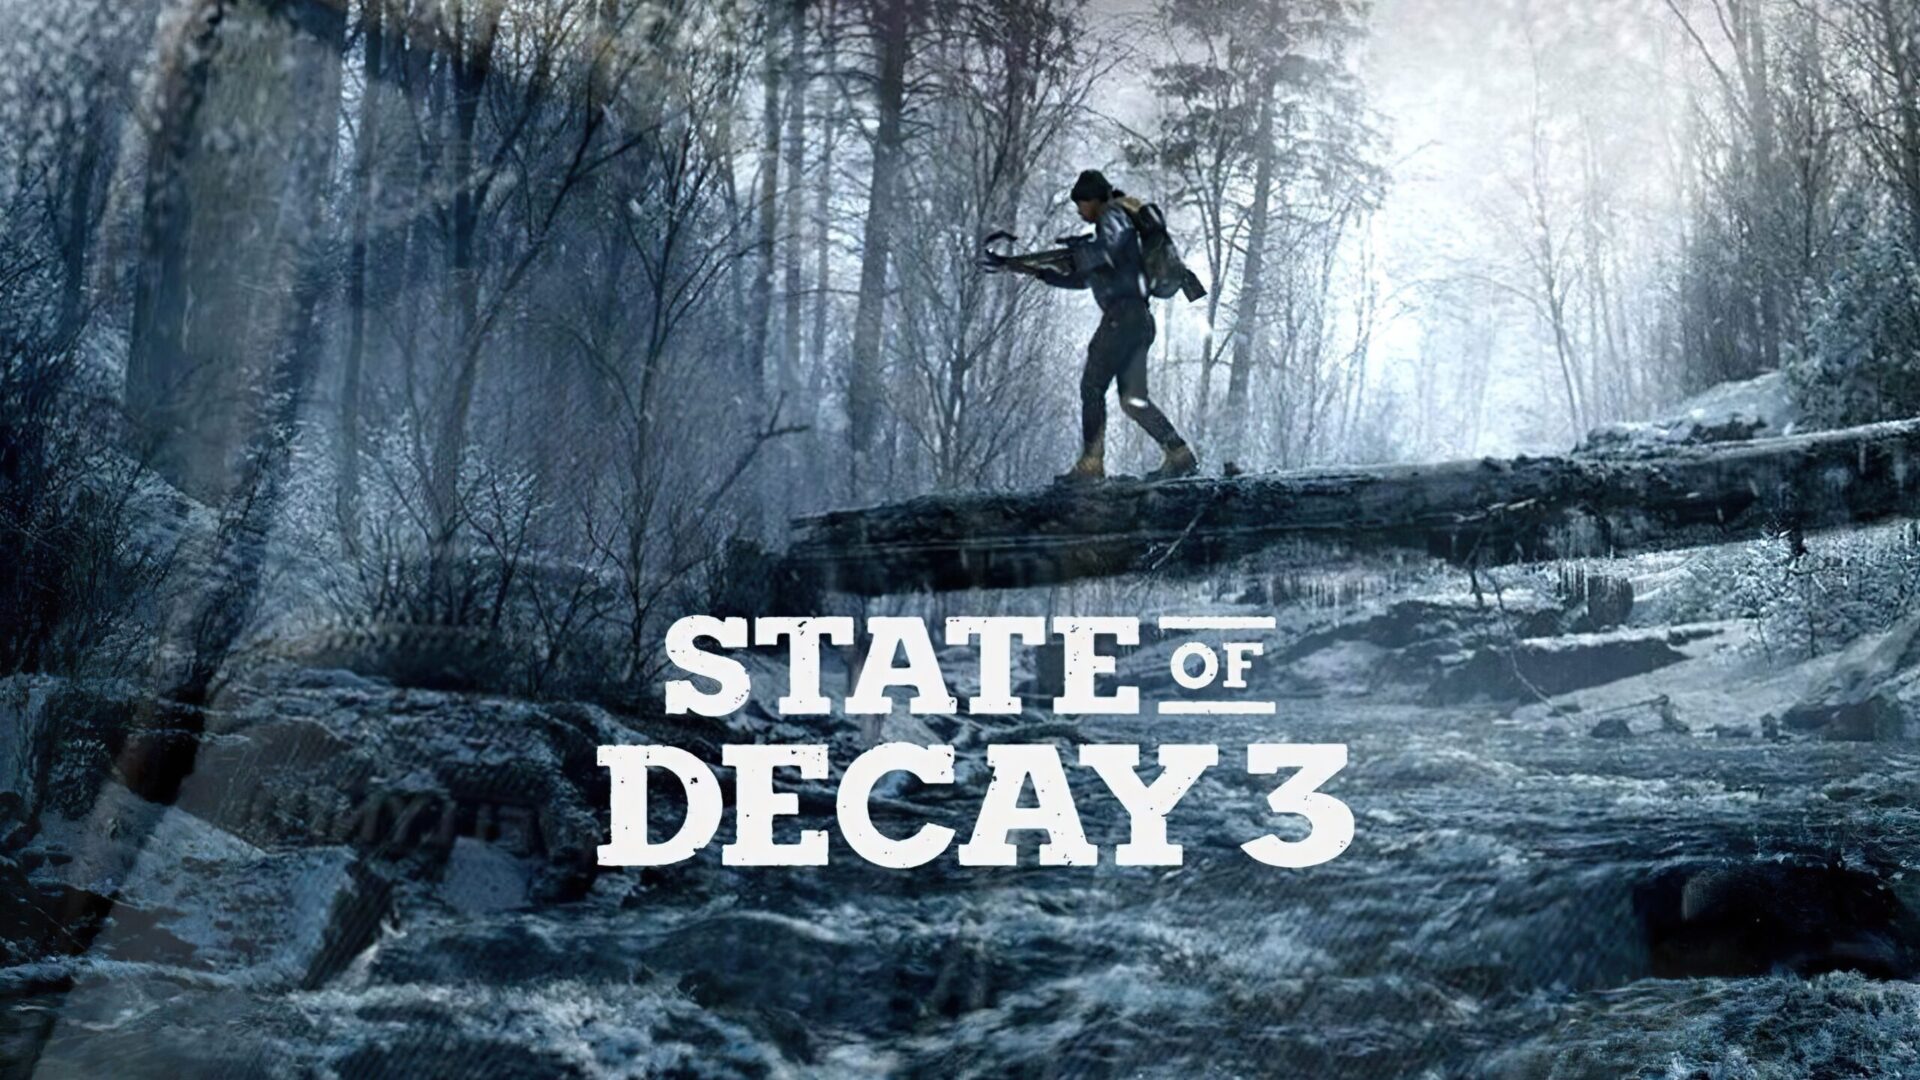 State of Decay 3: Release Date News, Development Delays, and Xbox Updates